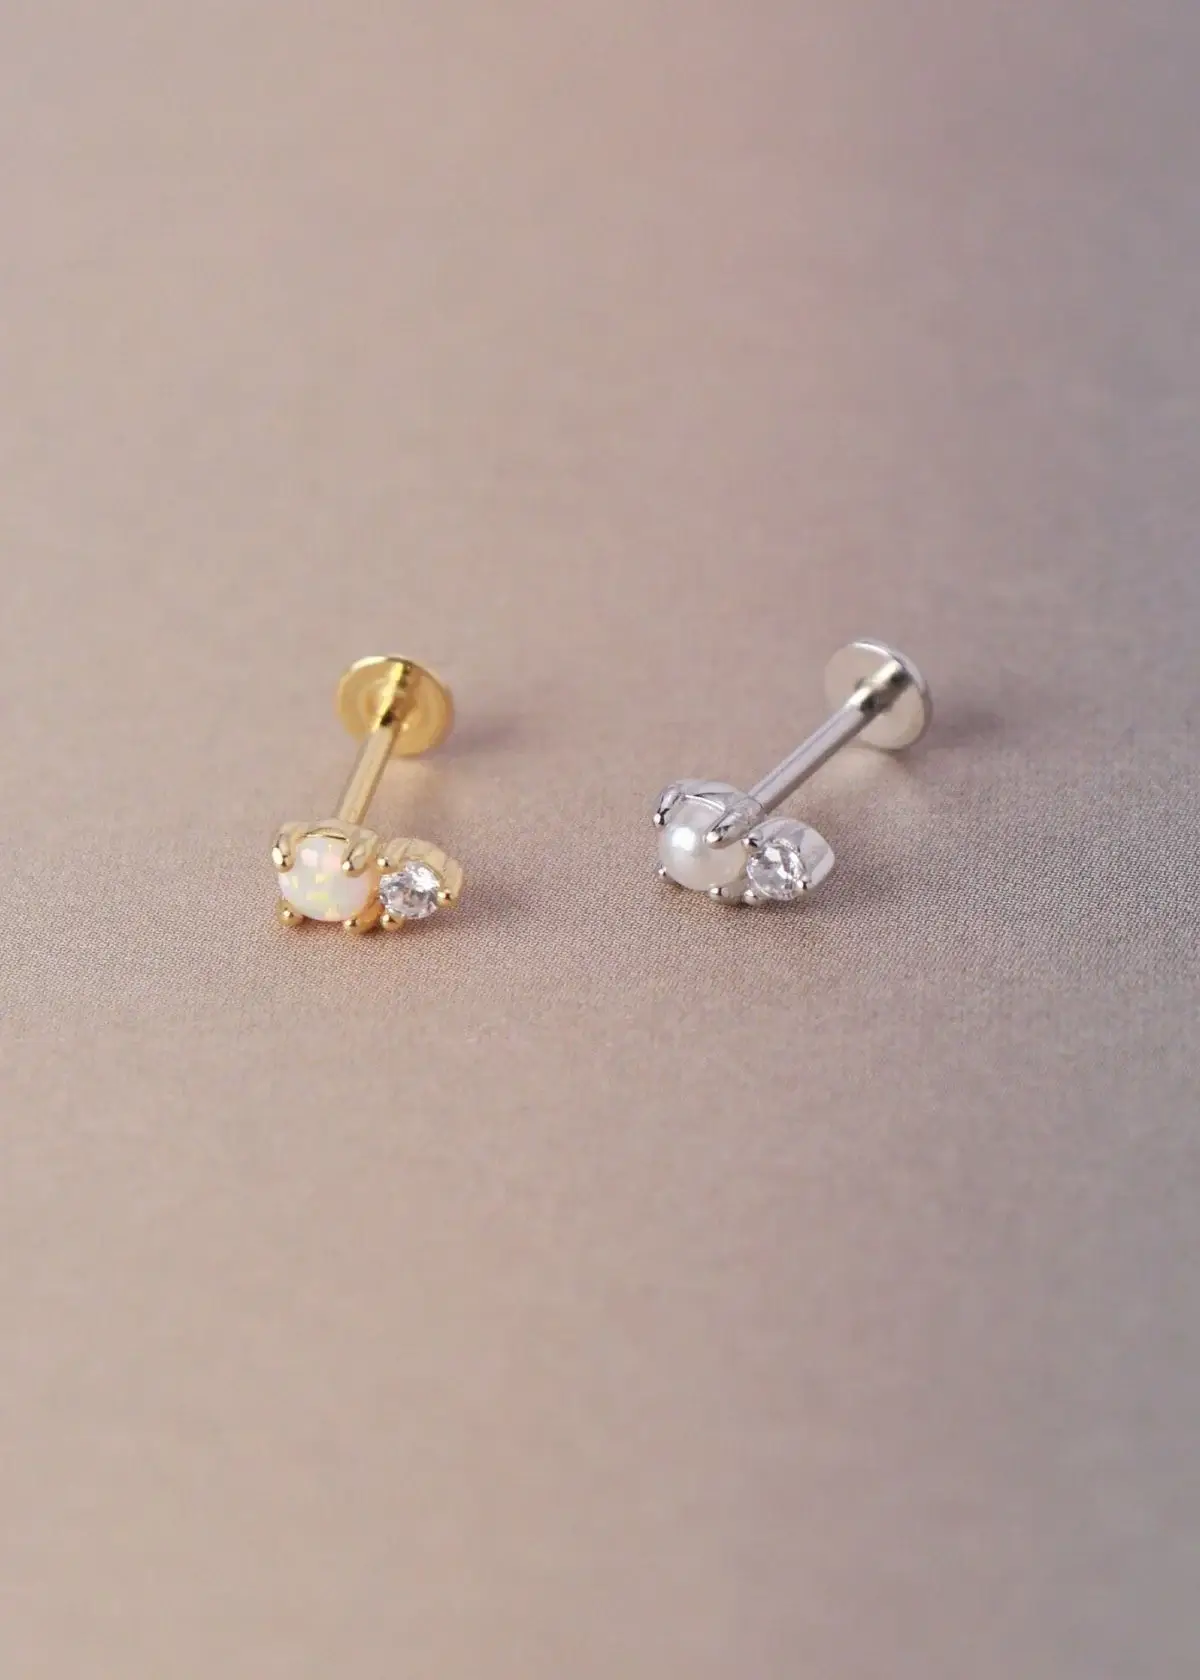 How do you clean flat-back earrings in gold?